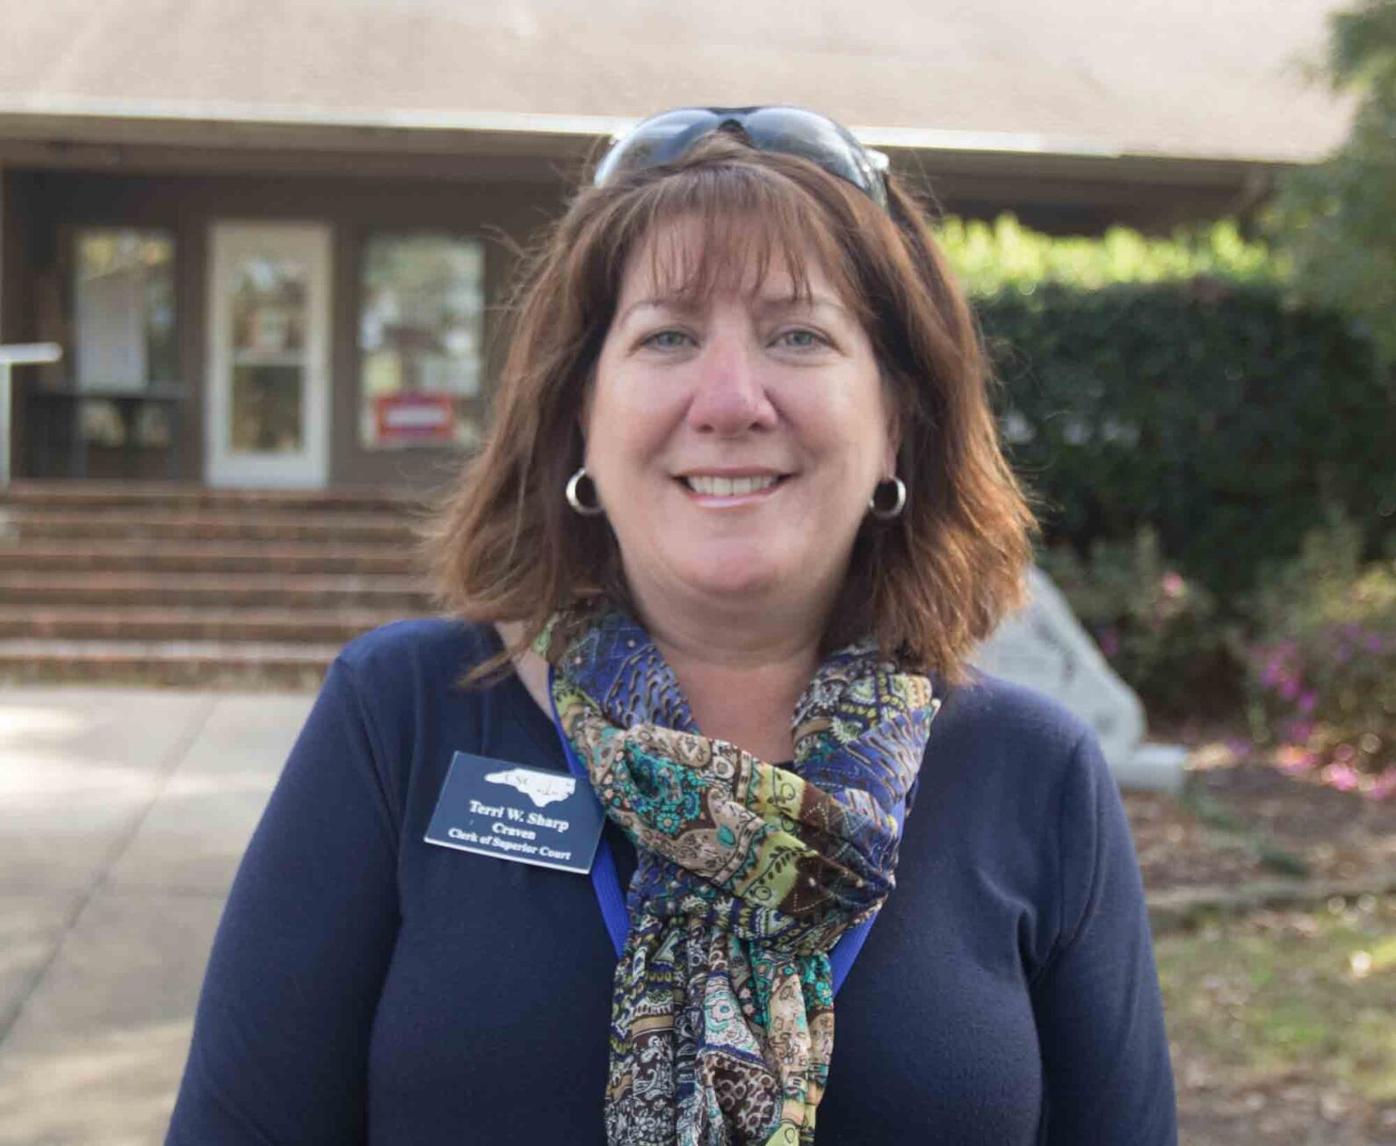 Terri Sharp remains Clerk of Courts after tight race Local News